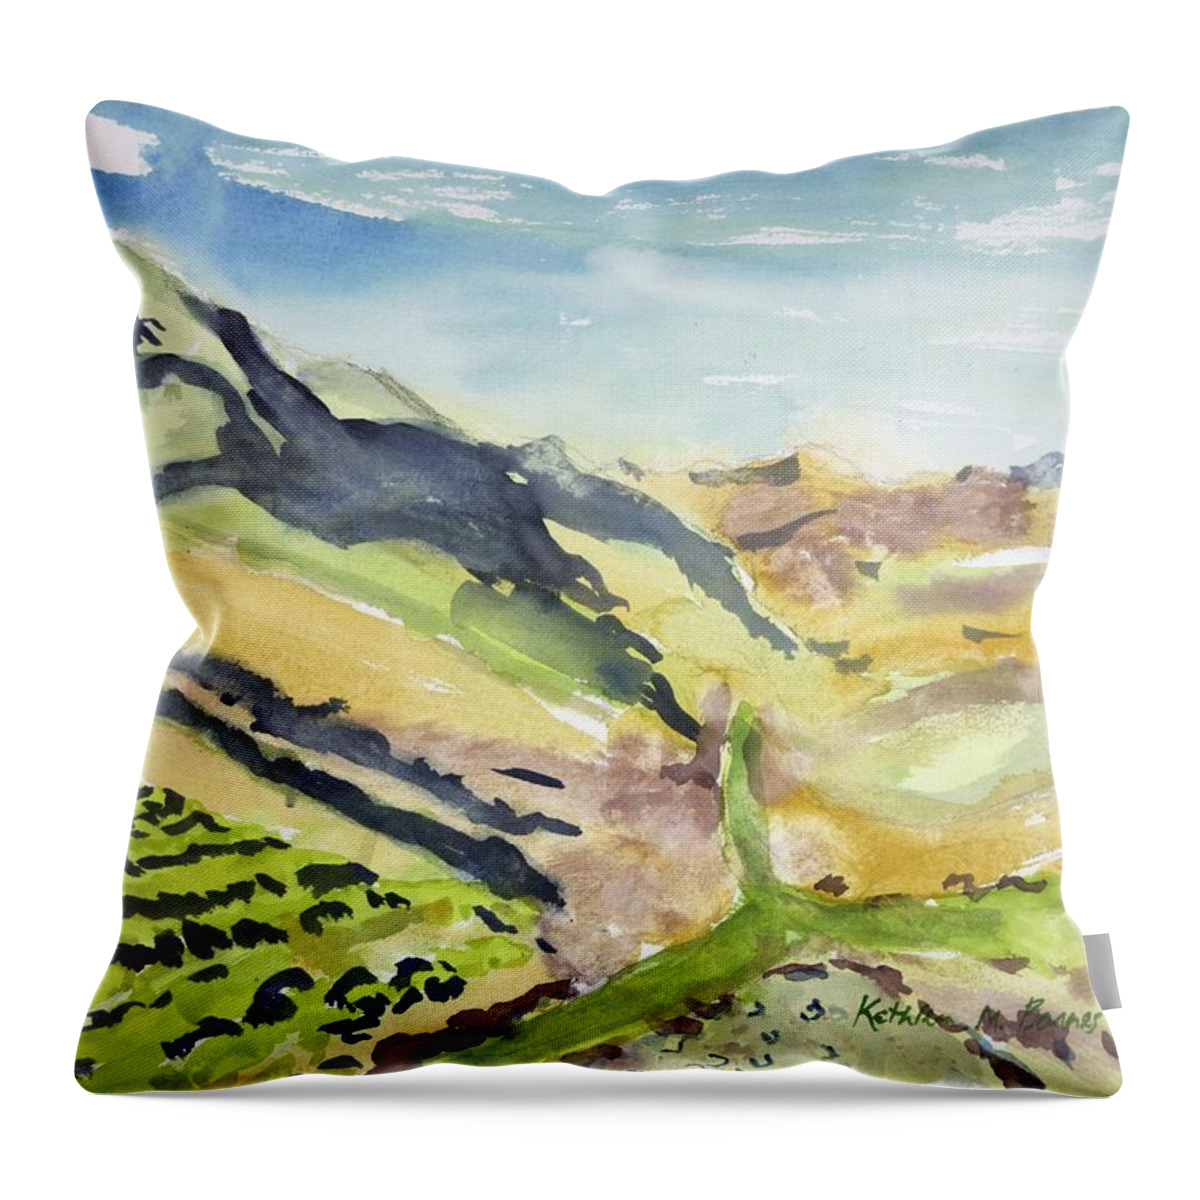  Throw Pillow featuring the painting Abstract Hillside by Kathleen Barnes